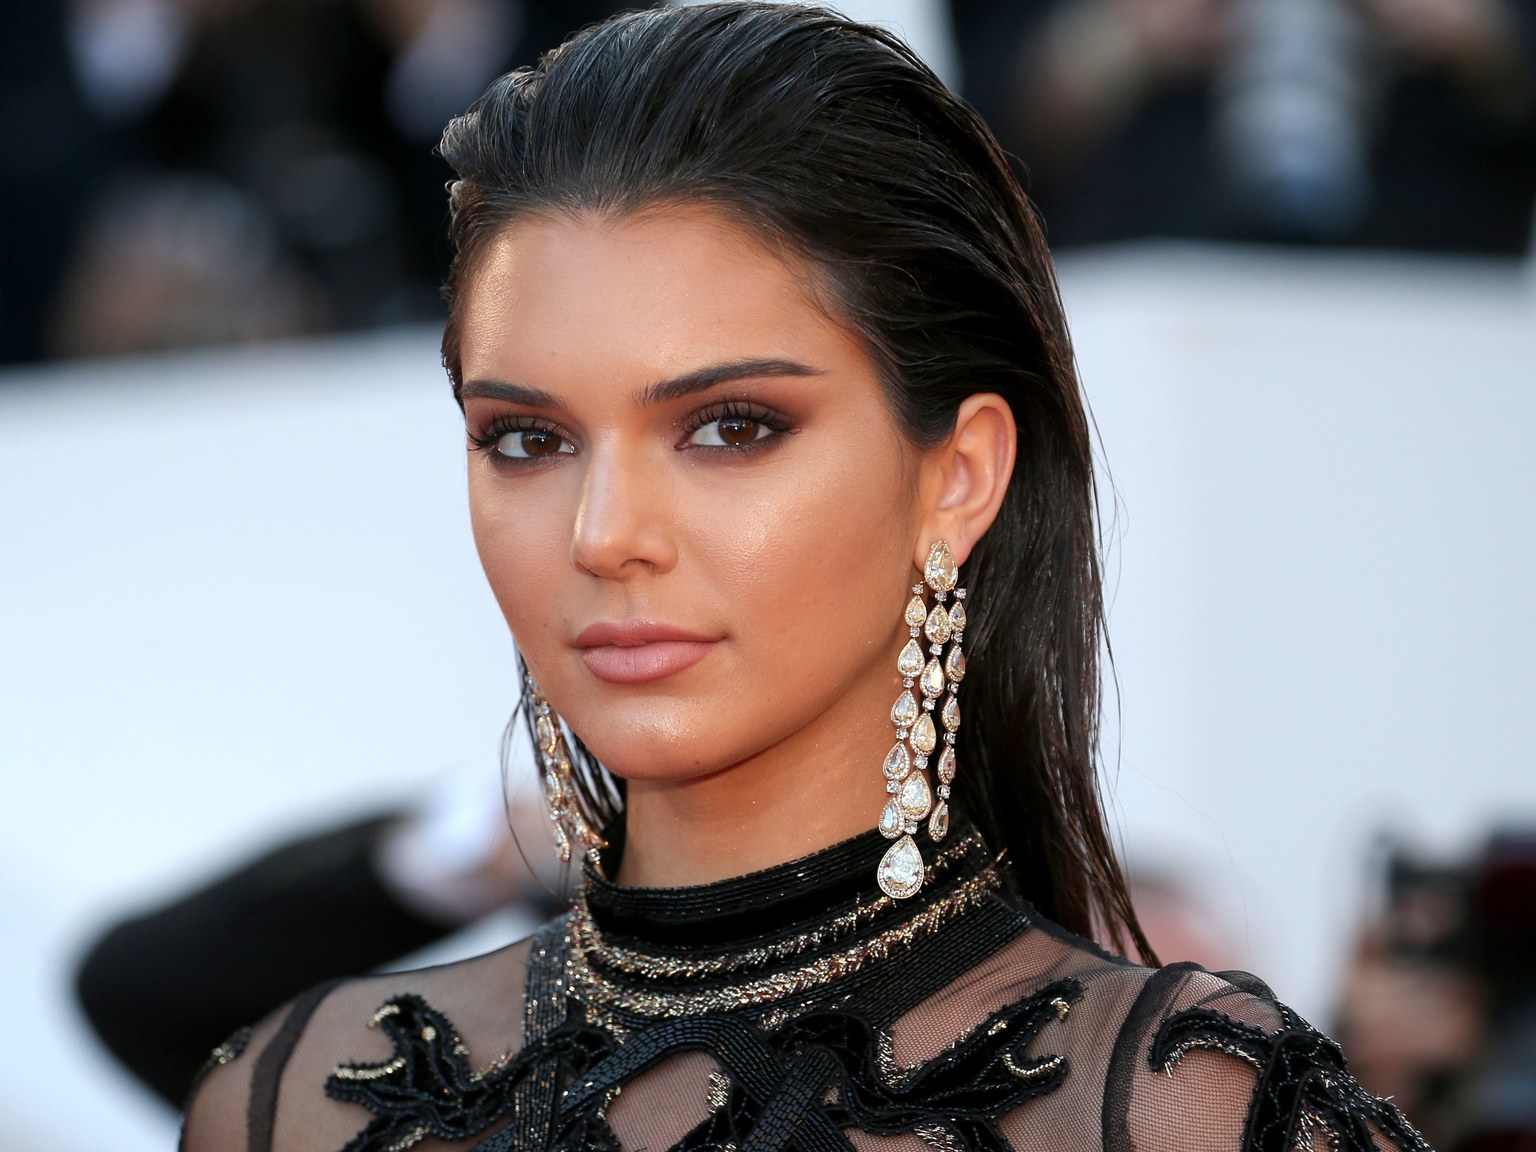 Kendall Jenner Arena Pile Top 10 Hottest Girls in The World